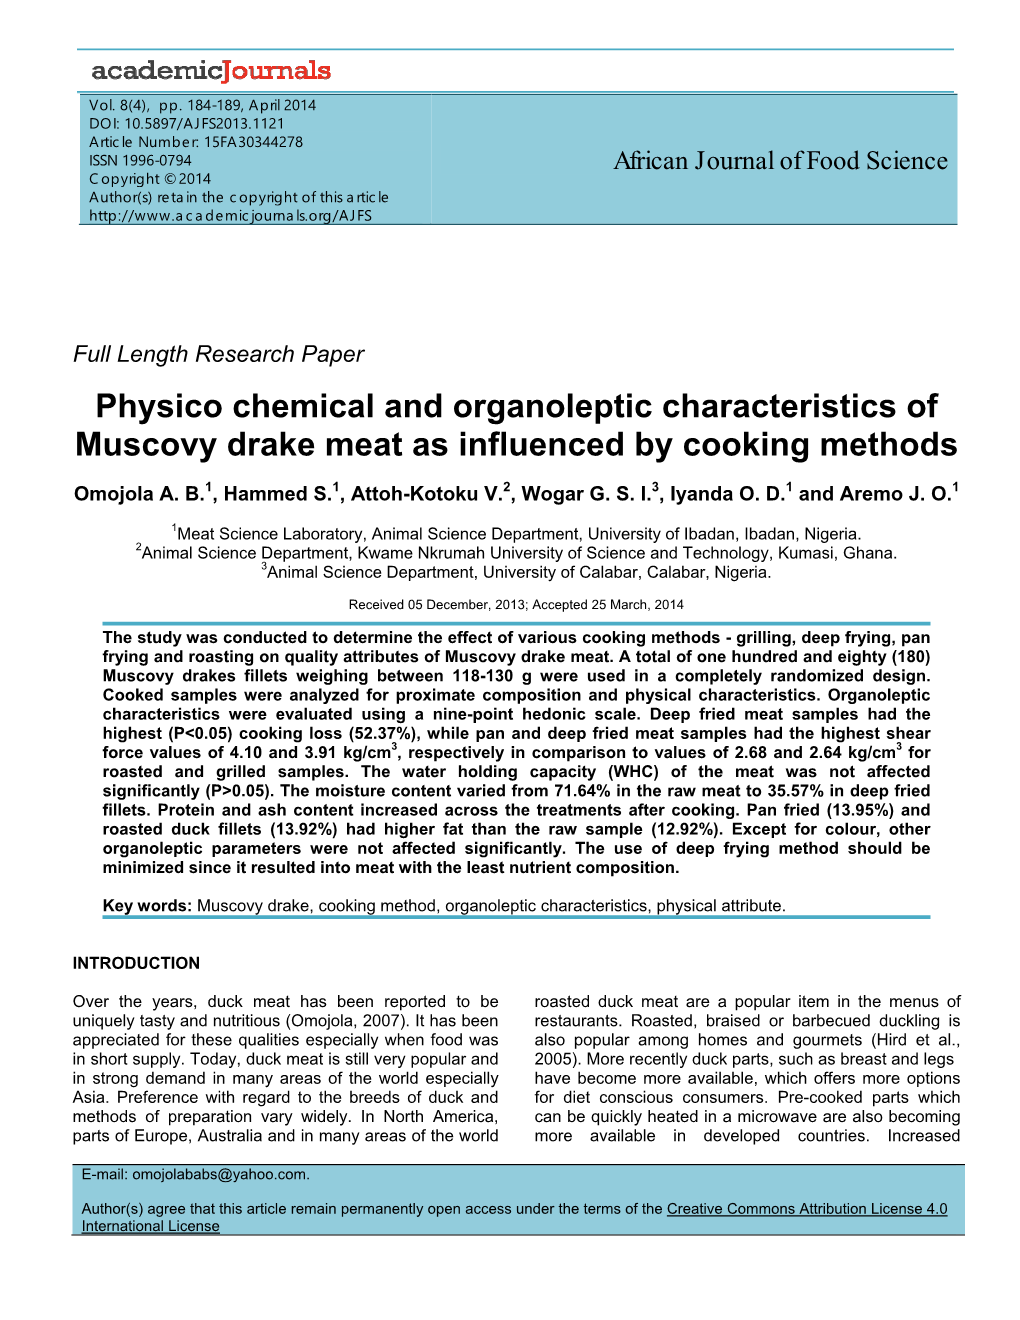 Physico Chemical and Organoleptic Characteristics of Muscovy Drake Meat As Influenced by Cooking Methods